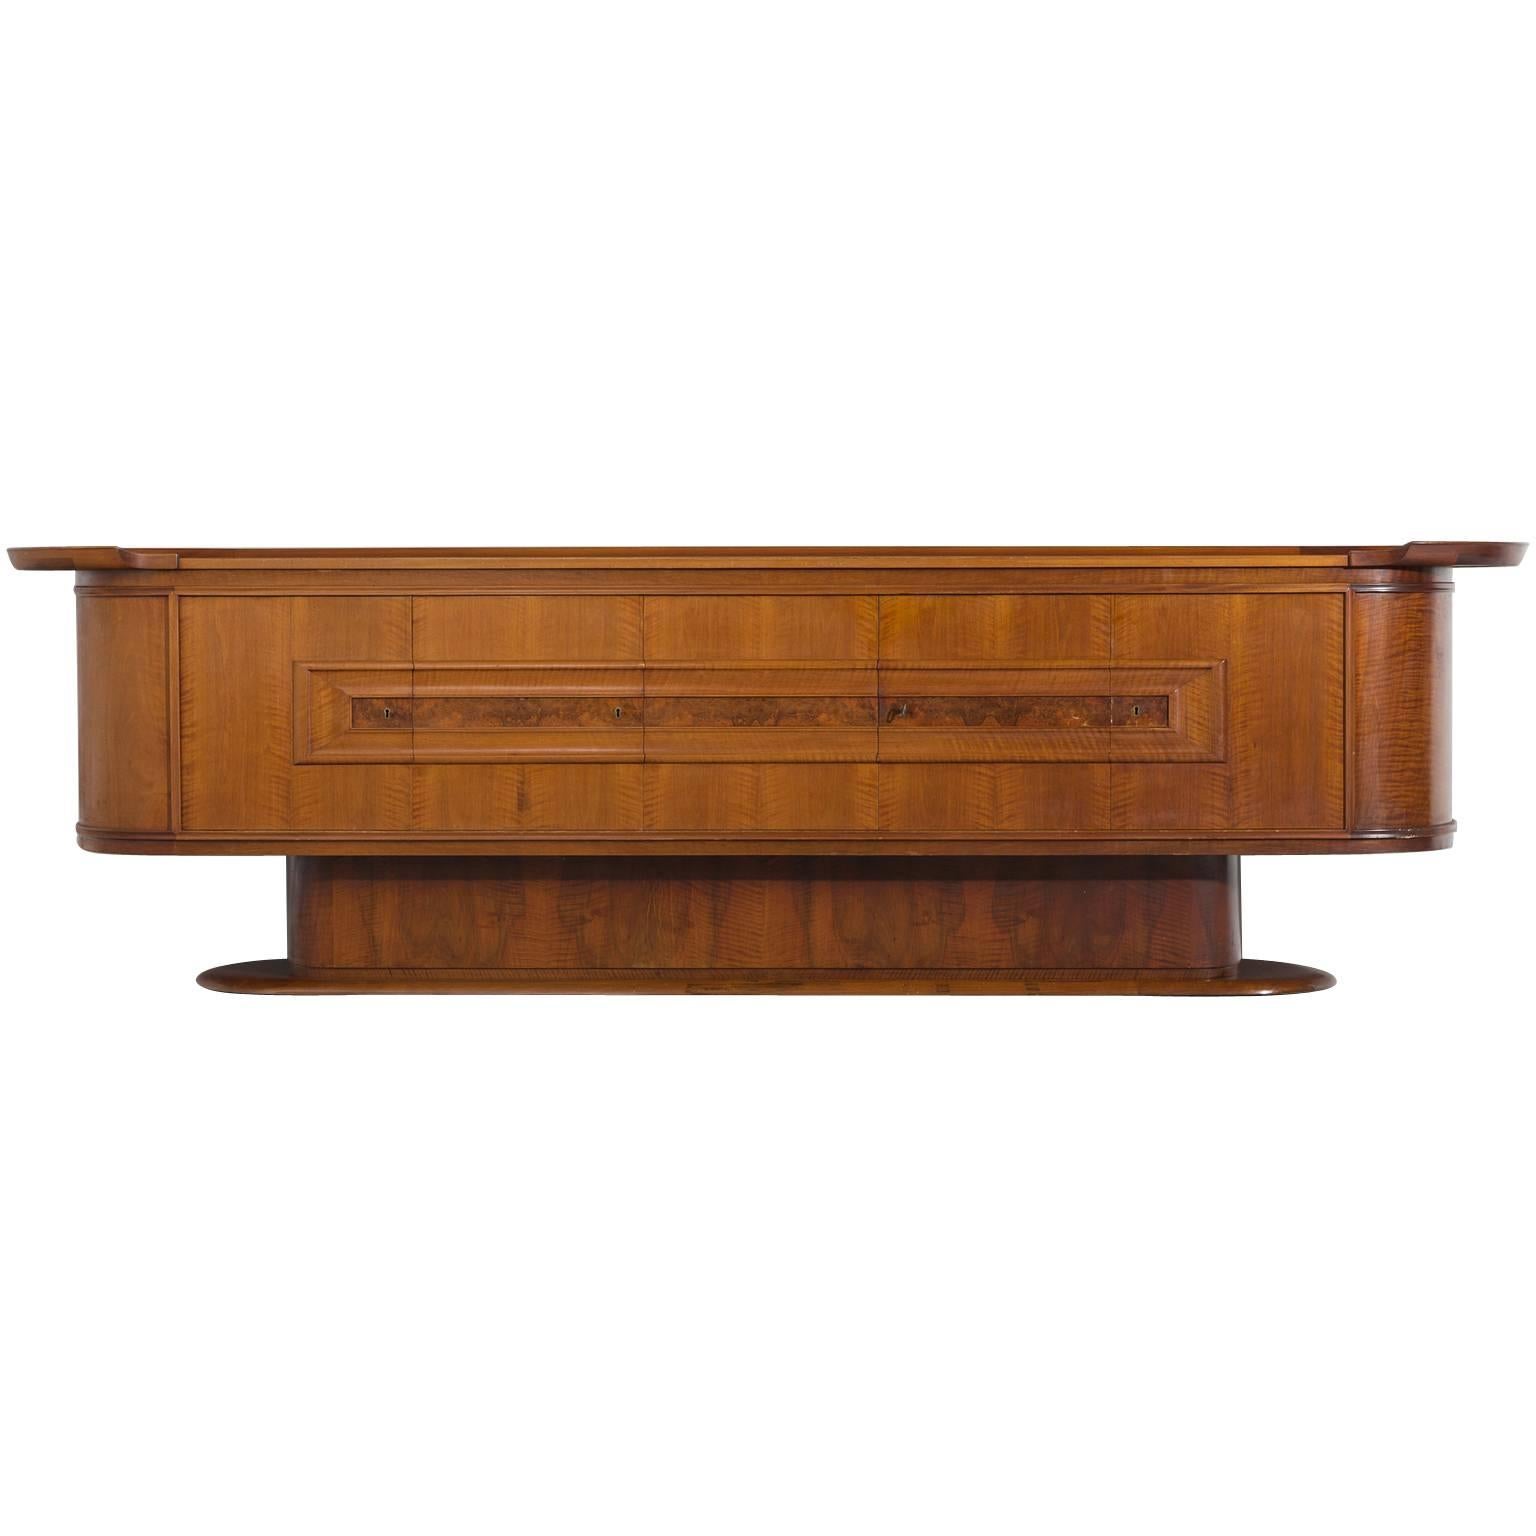 A.A. Patijn Large Sideboard in Walnut and Burl Wood